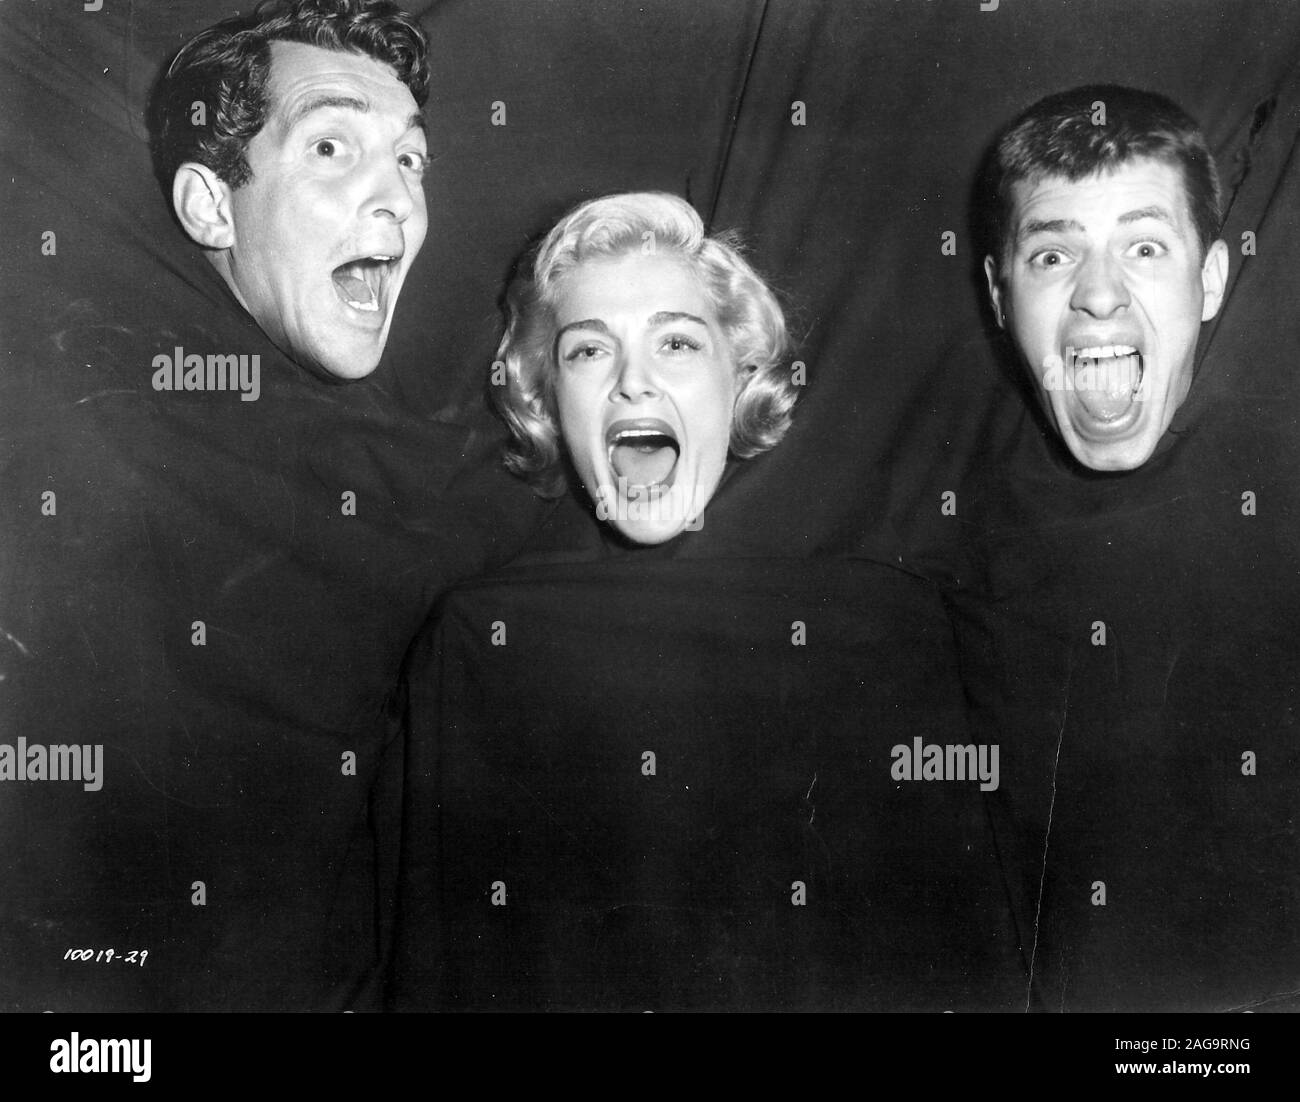 JERRY LEWIS, DEAN MARTIN and LIZABETH SCOTT in SCARED STIFF (1953), directed by GEORGE MARSHALL. Credit: PARAMOUNT PICTURES / Album Stock Photo